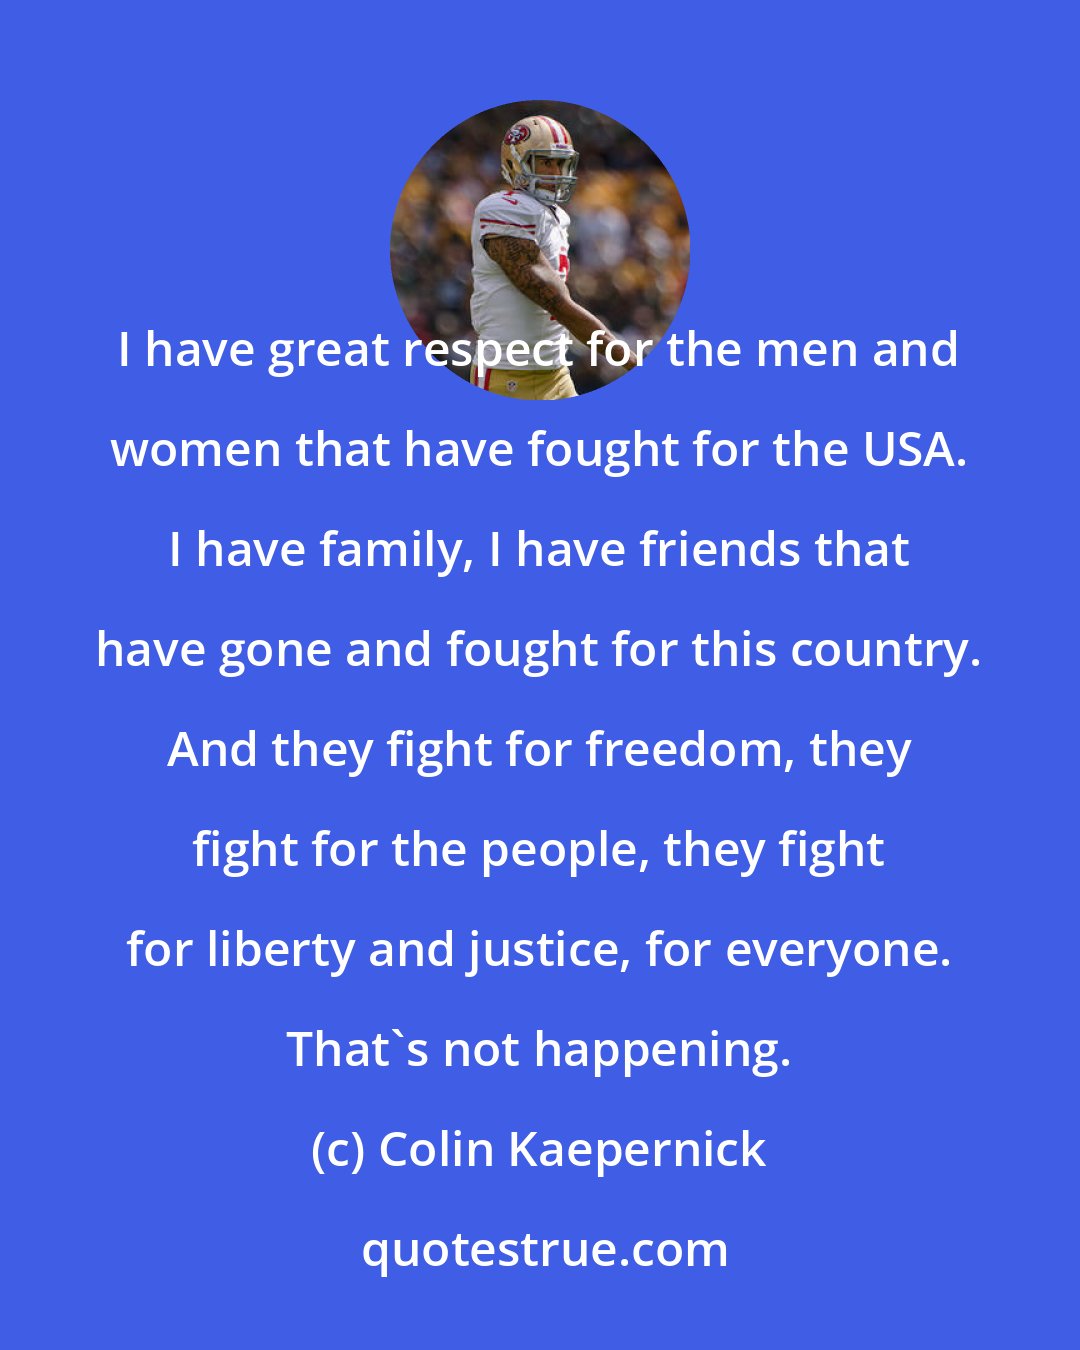 Colin Kaepernick: I have great respect for the men and women that have fought for the USA. I have family, I have friends that have gone and fought for this country. And they fight for freedom, they fight for the people, they fight for liberty and justice, for everyone. That's not happening.